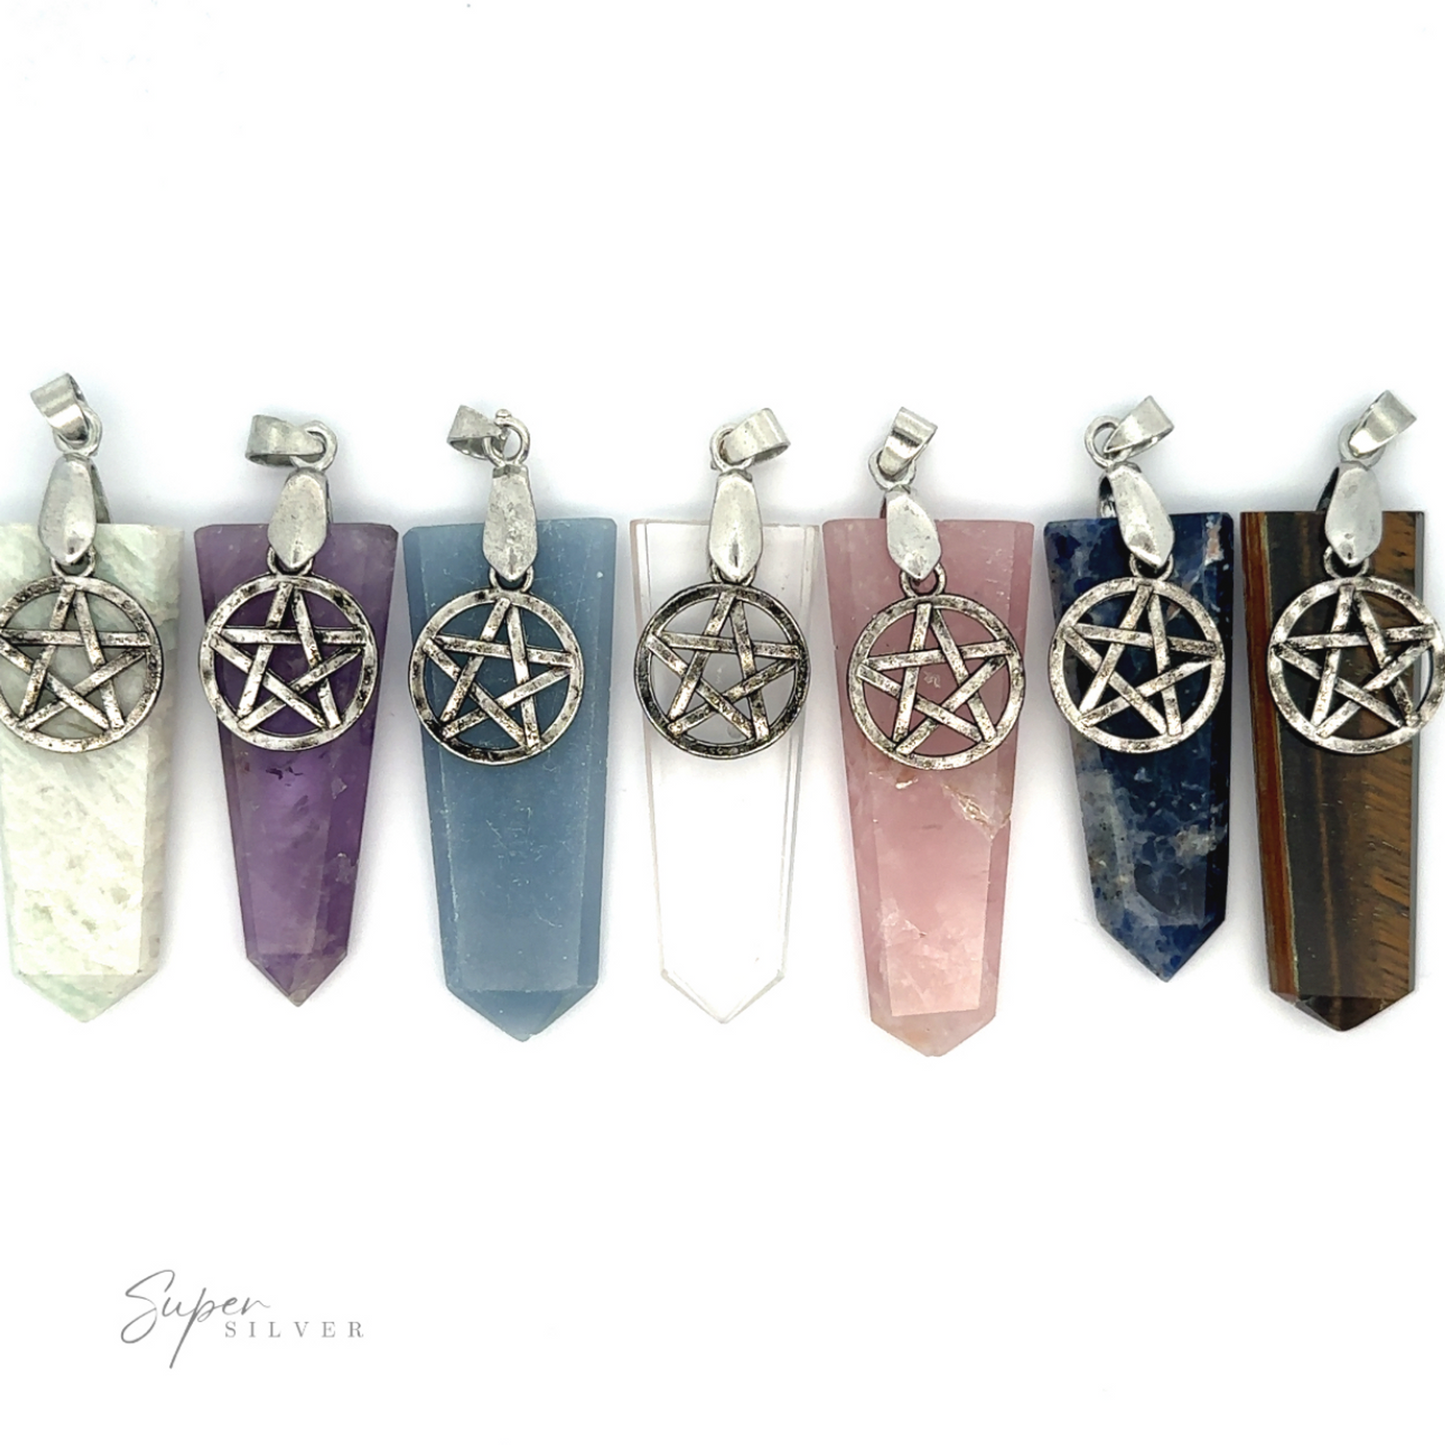 
                  
                    Seven Pentagram Stone Slab Pendants in various colors, each adorned with a mixed metals pentagram charm. Crystals include green, purple, blue, light blue, pink, dark blue, and brown.
                  
                